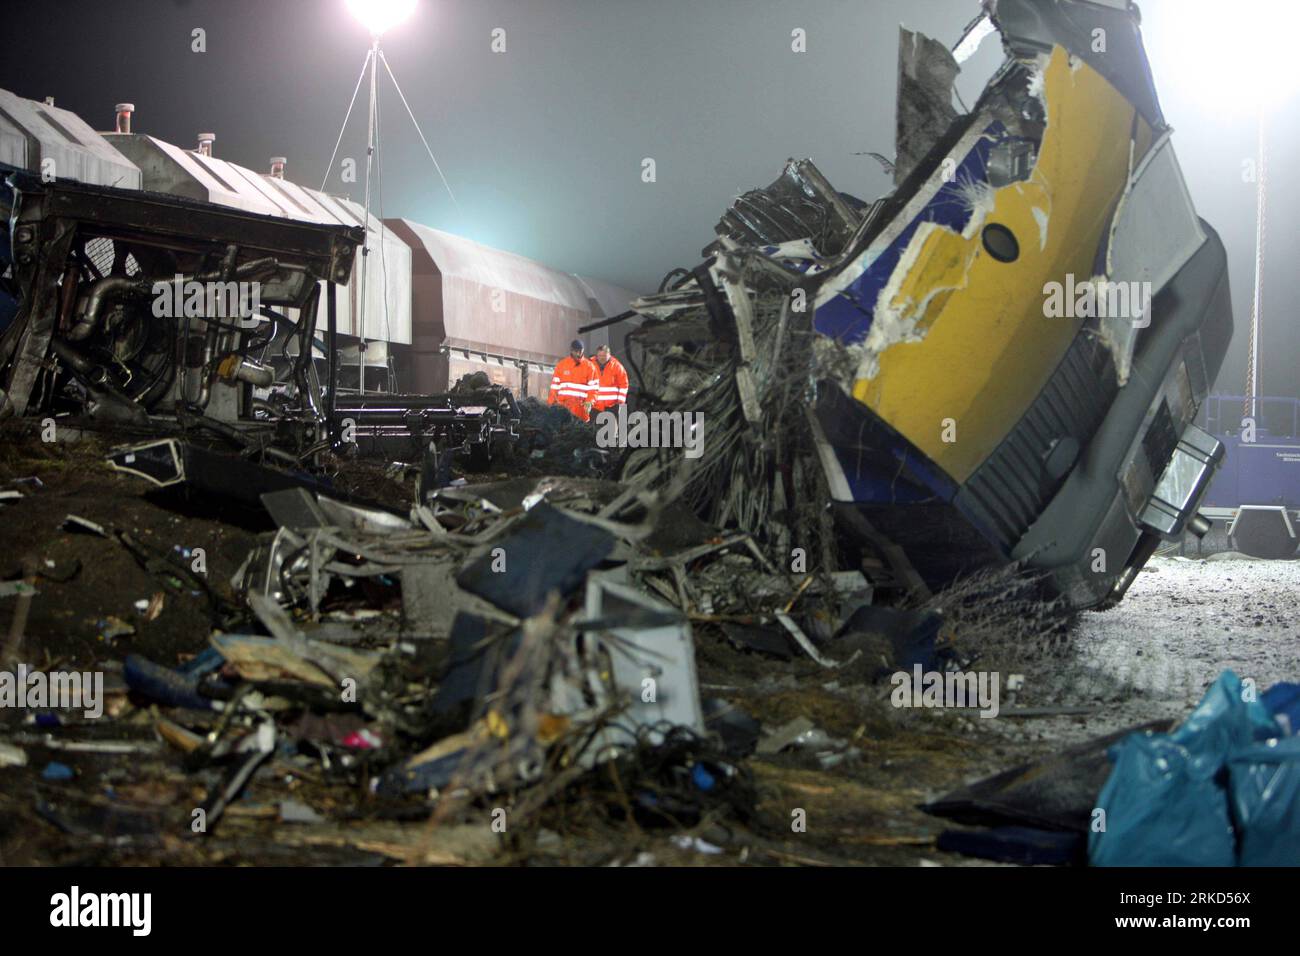 GER, Hordorf, Oschersleben - Jan. 30, 2011 Xinhua -- Rescuers work at the scene of a train collision accident in the Germany s eastern state Saxony-Anhalt on Jan. 30, 2011. A passenger and a freight train collided with each other here late Saturday, leaving at least 10 people dead and about 20 seriously injured, police said. Xinhua/Luo Huanhuan zf GERMANY-SAXONY-ANHALT-TRAIN COLLISION PUBLICATIONxNOTxINxCHN Stock Photo